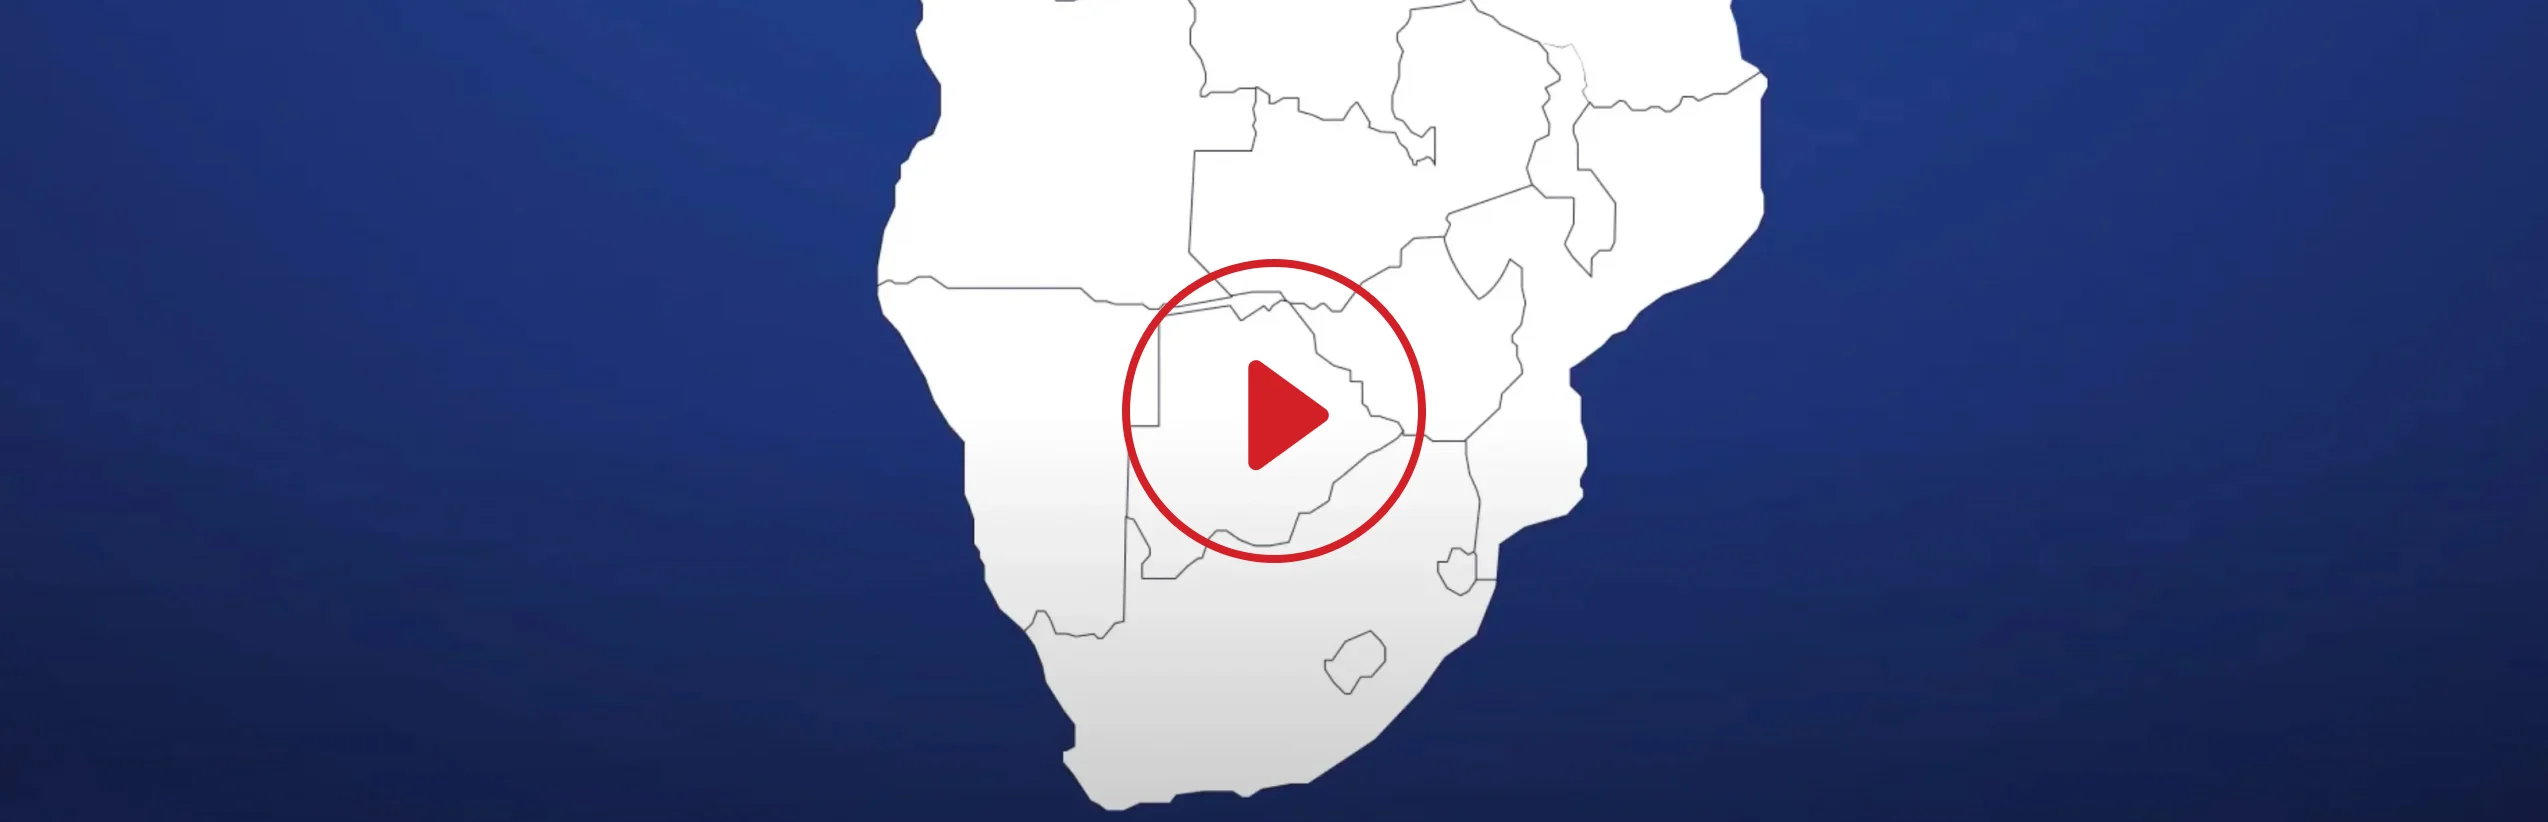 Paratus Africa - Connecting Africans